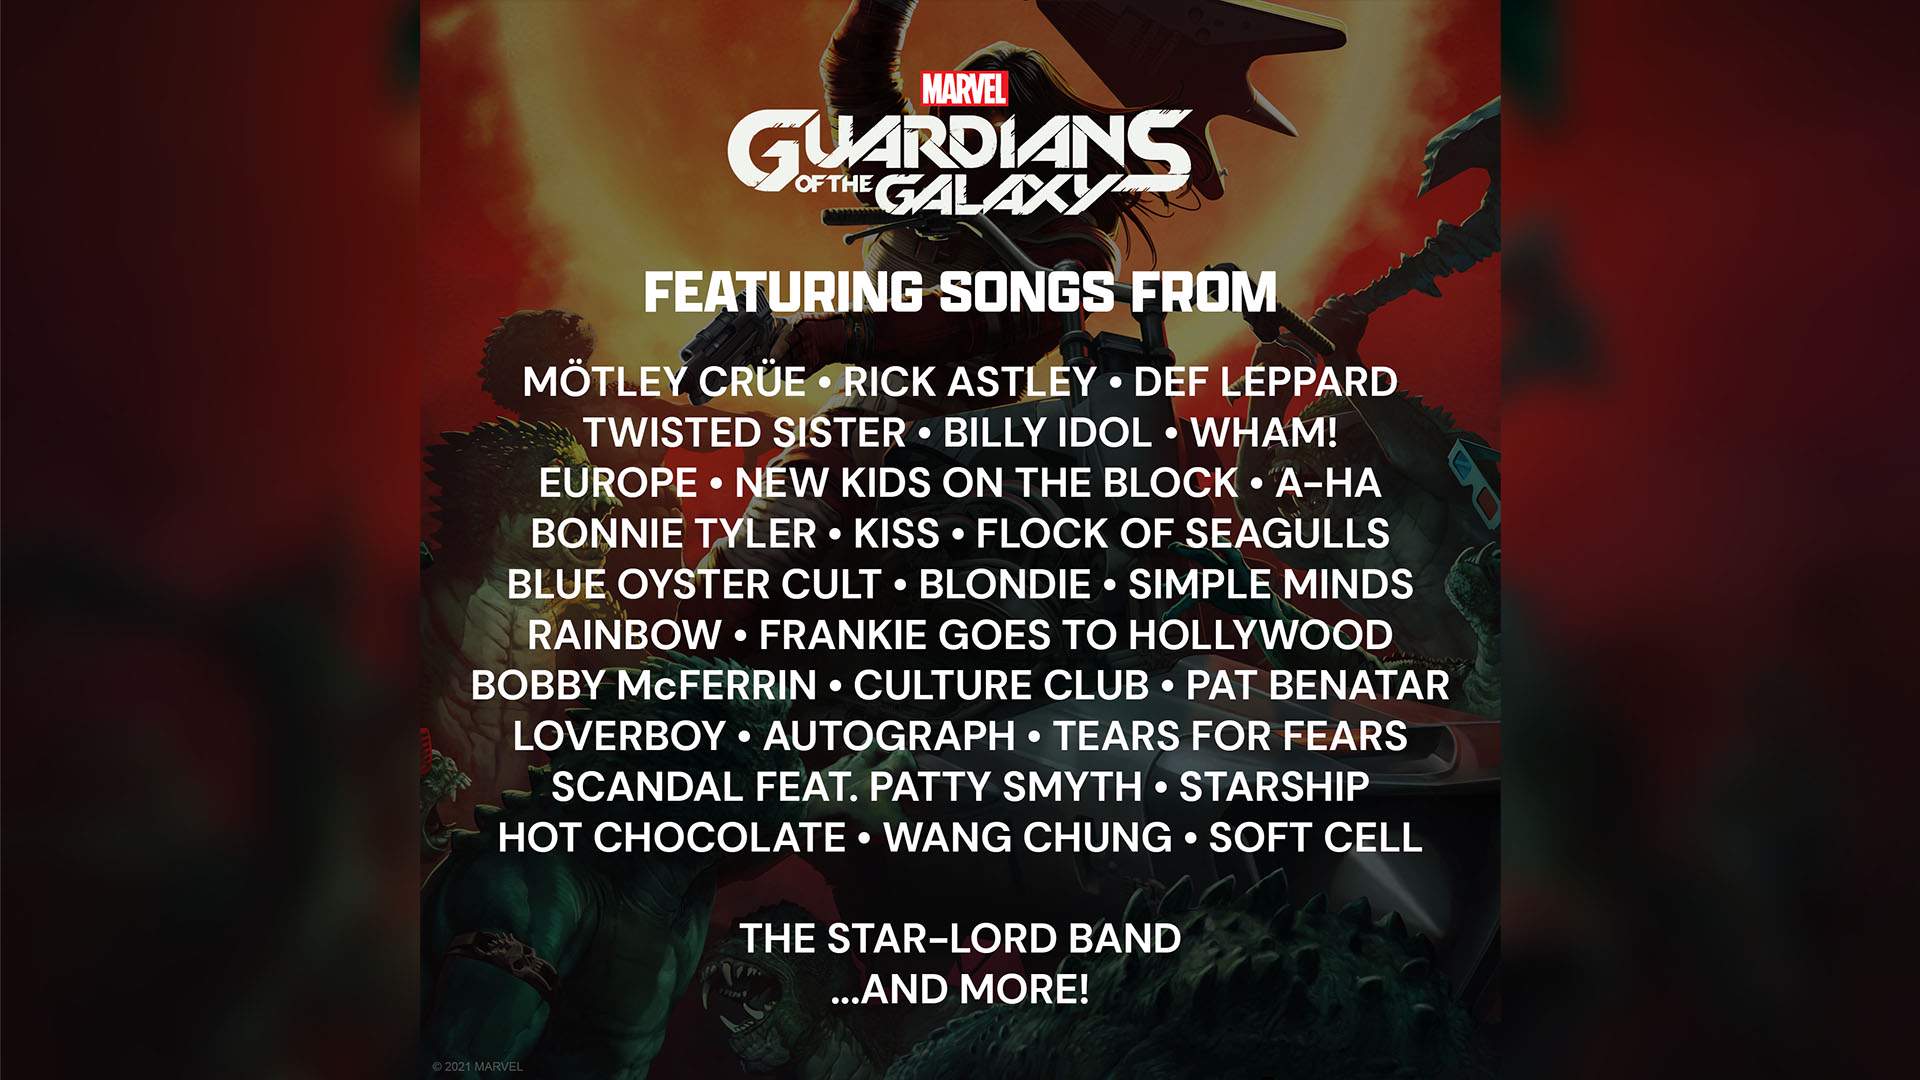 The list of music artists appearing on the Marvel's Guardians of the Galaxy soundtrack.